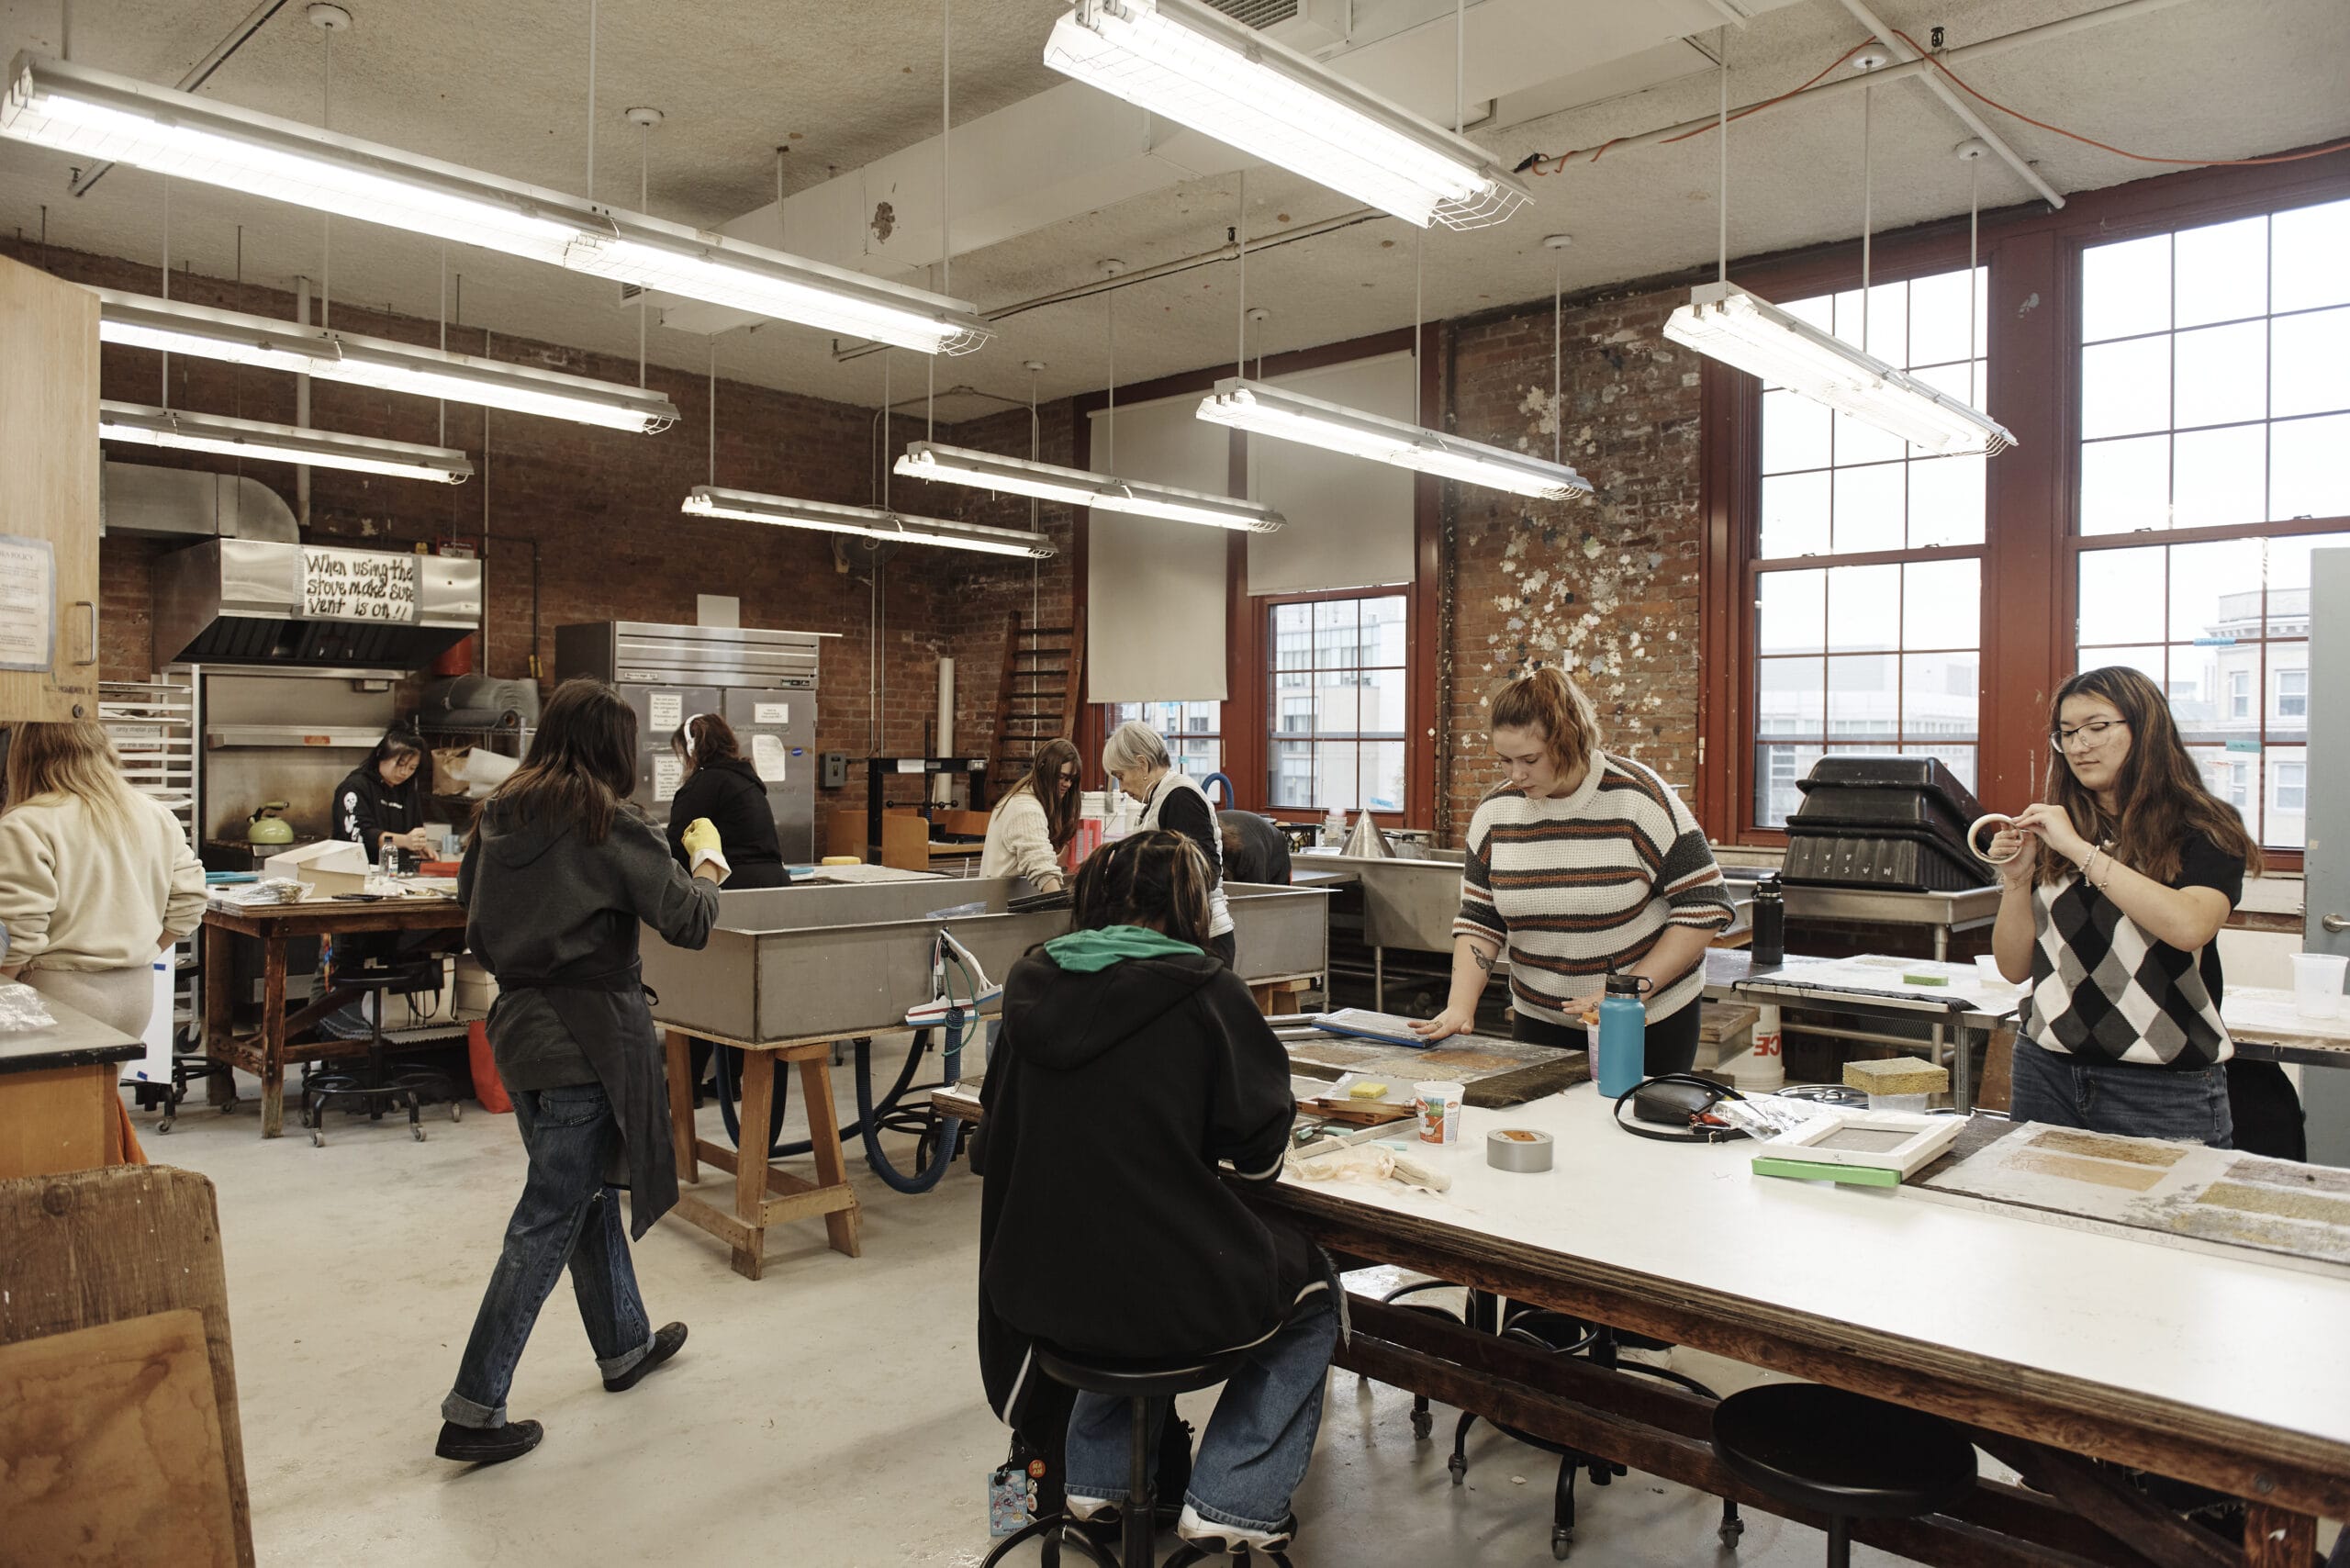 Students standing and working at large tables in the Fibers lab.